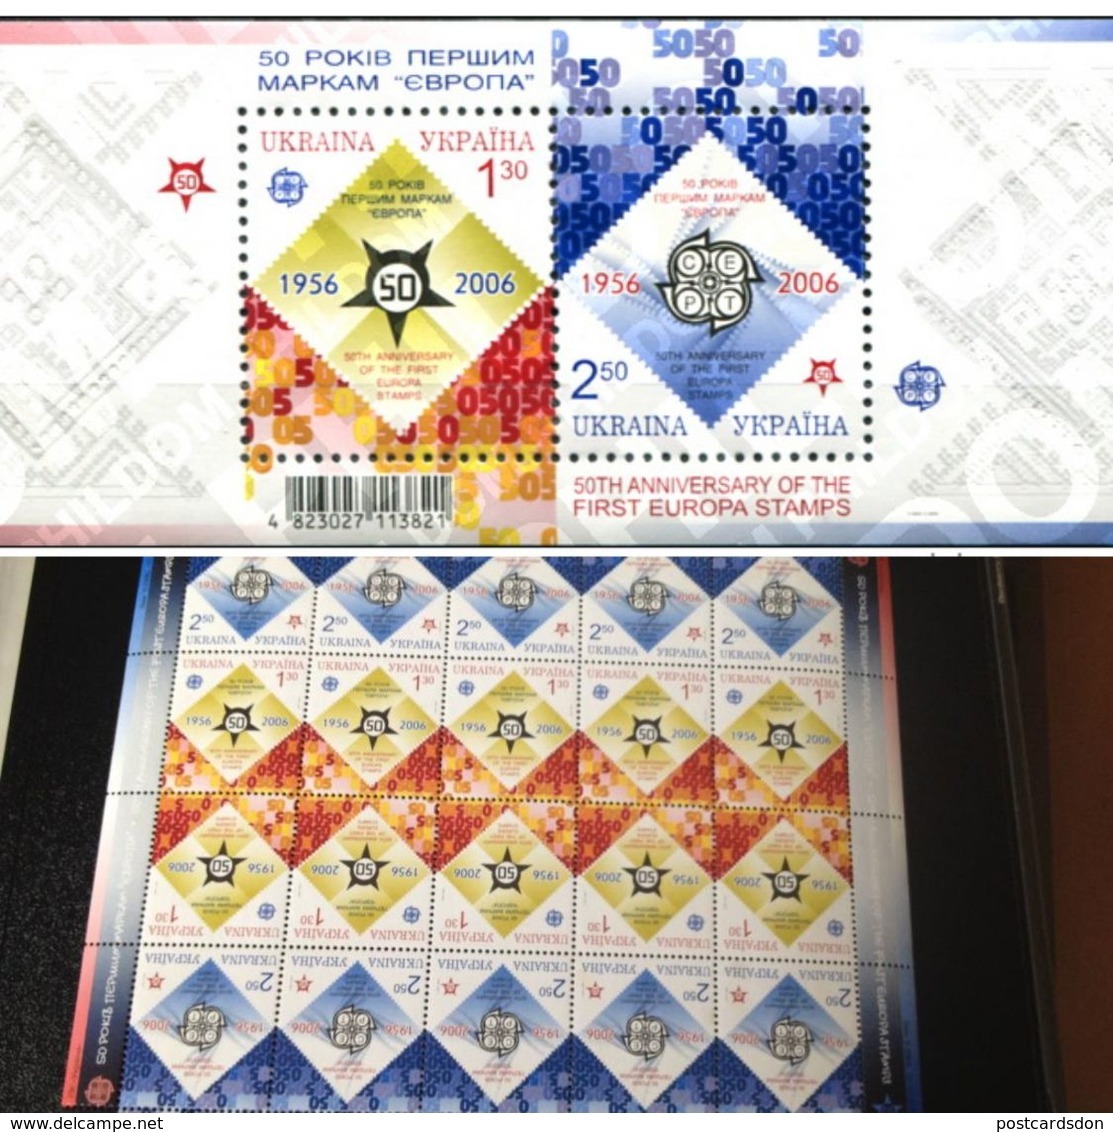 FULL LOT Ukraine - 2006 - 50th Anniversary Of First Europa CEPT Issue - Mint Stamp Sheet AND 1 Val + 1 SS MNH - Ukraine